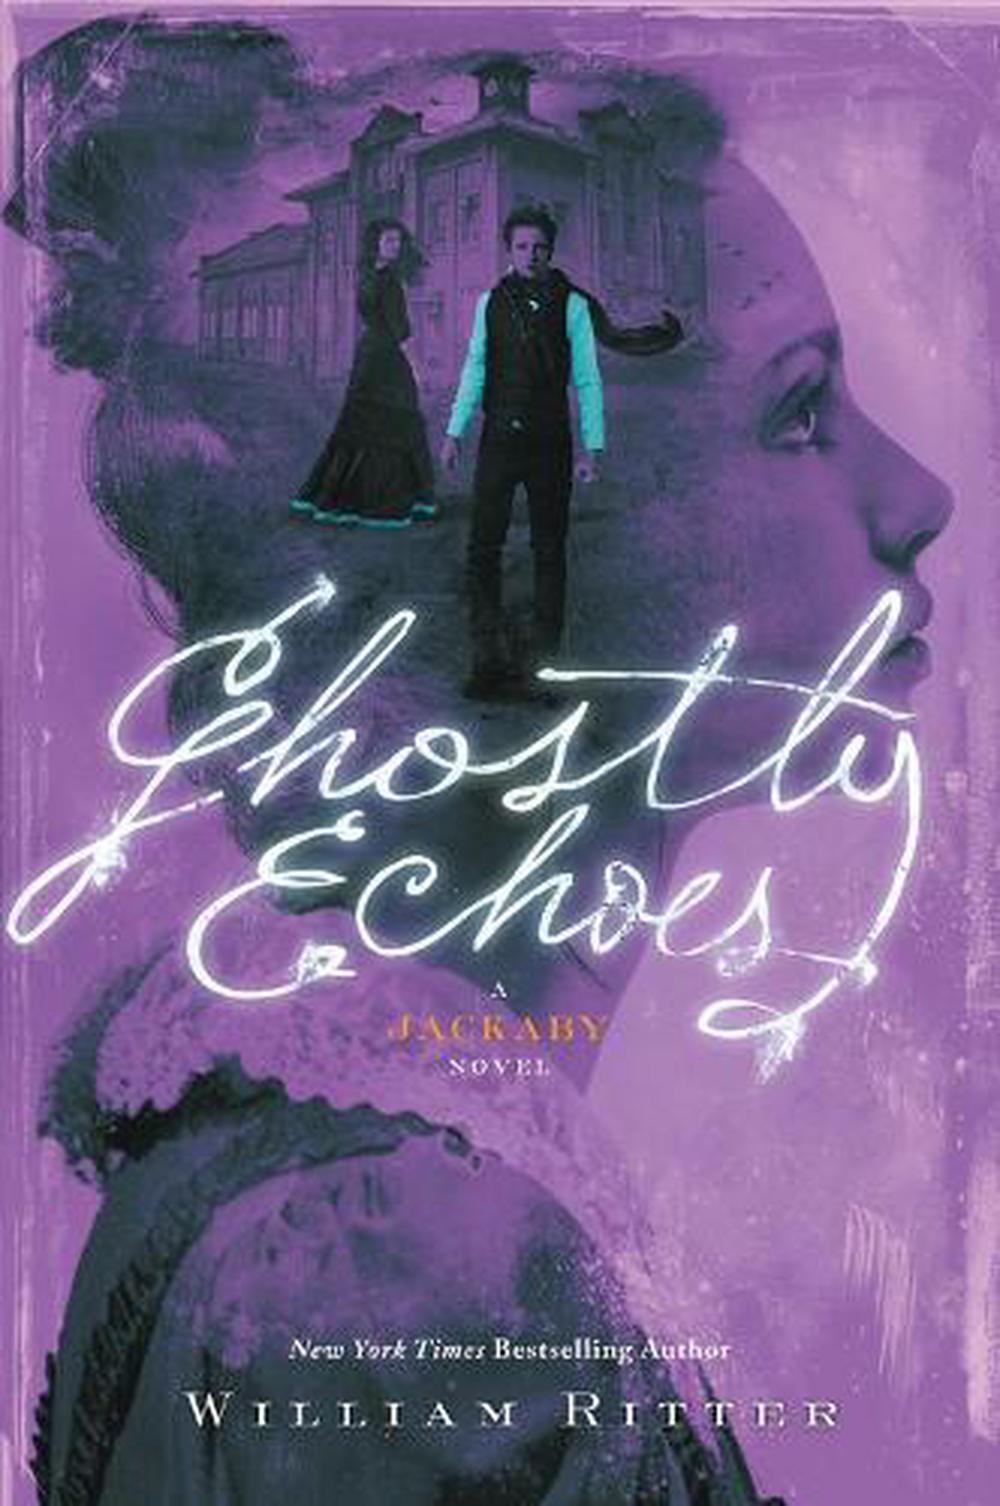 ghostly echoes a jackaby novel